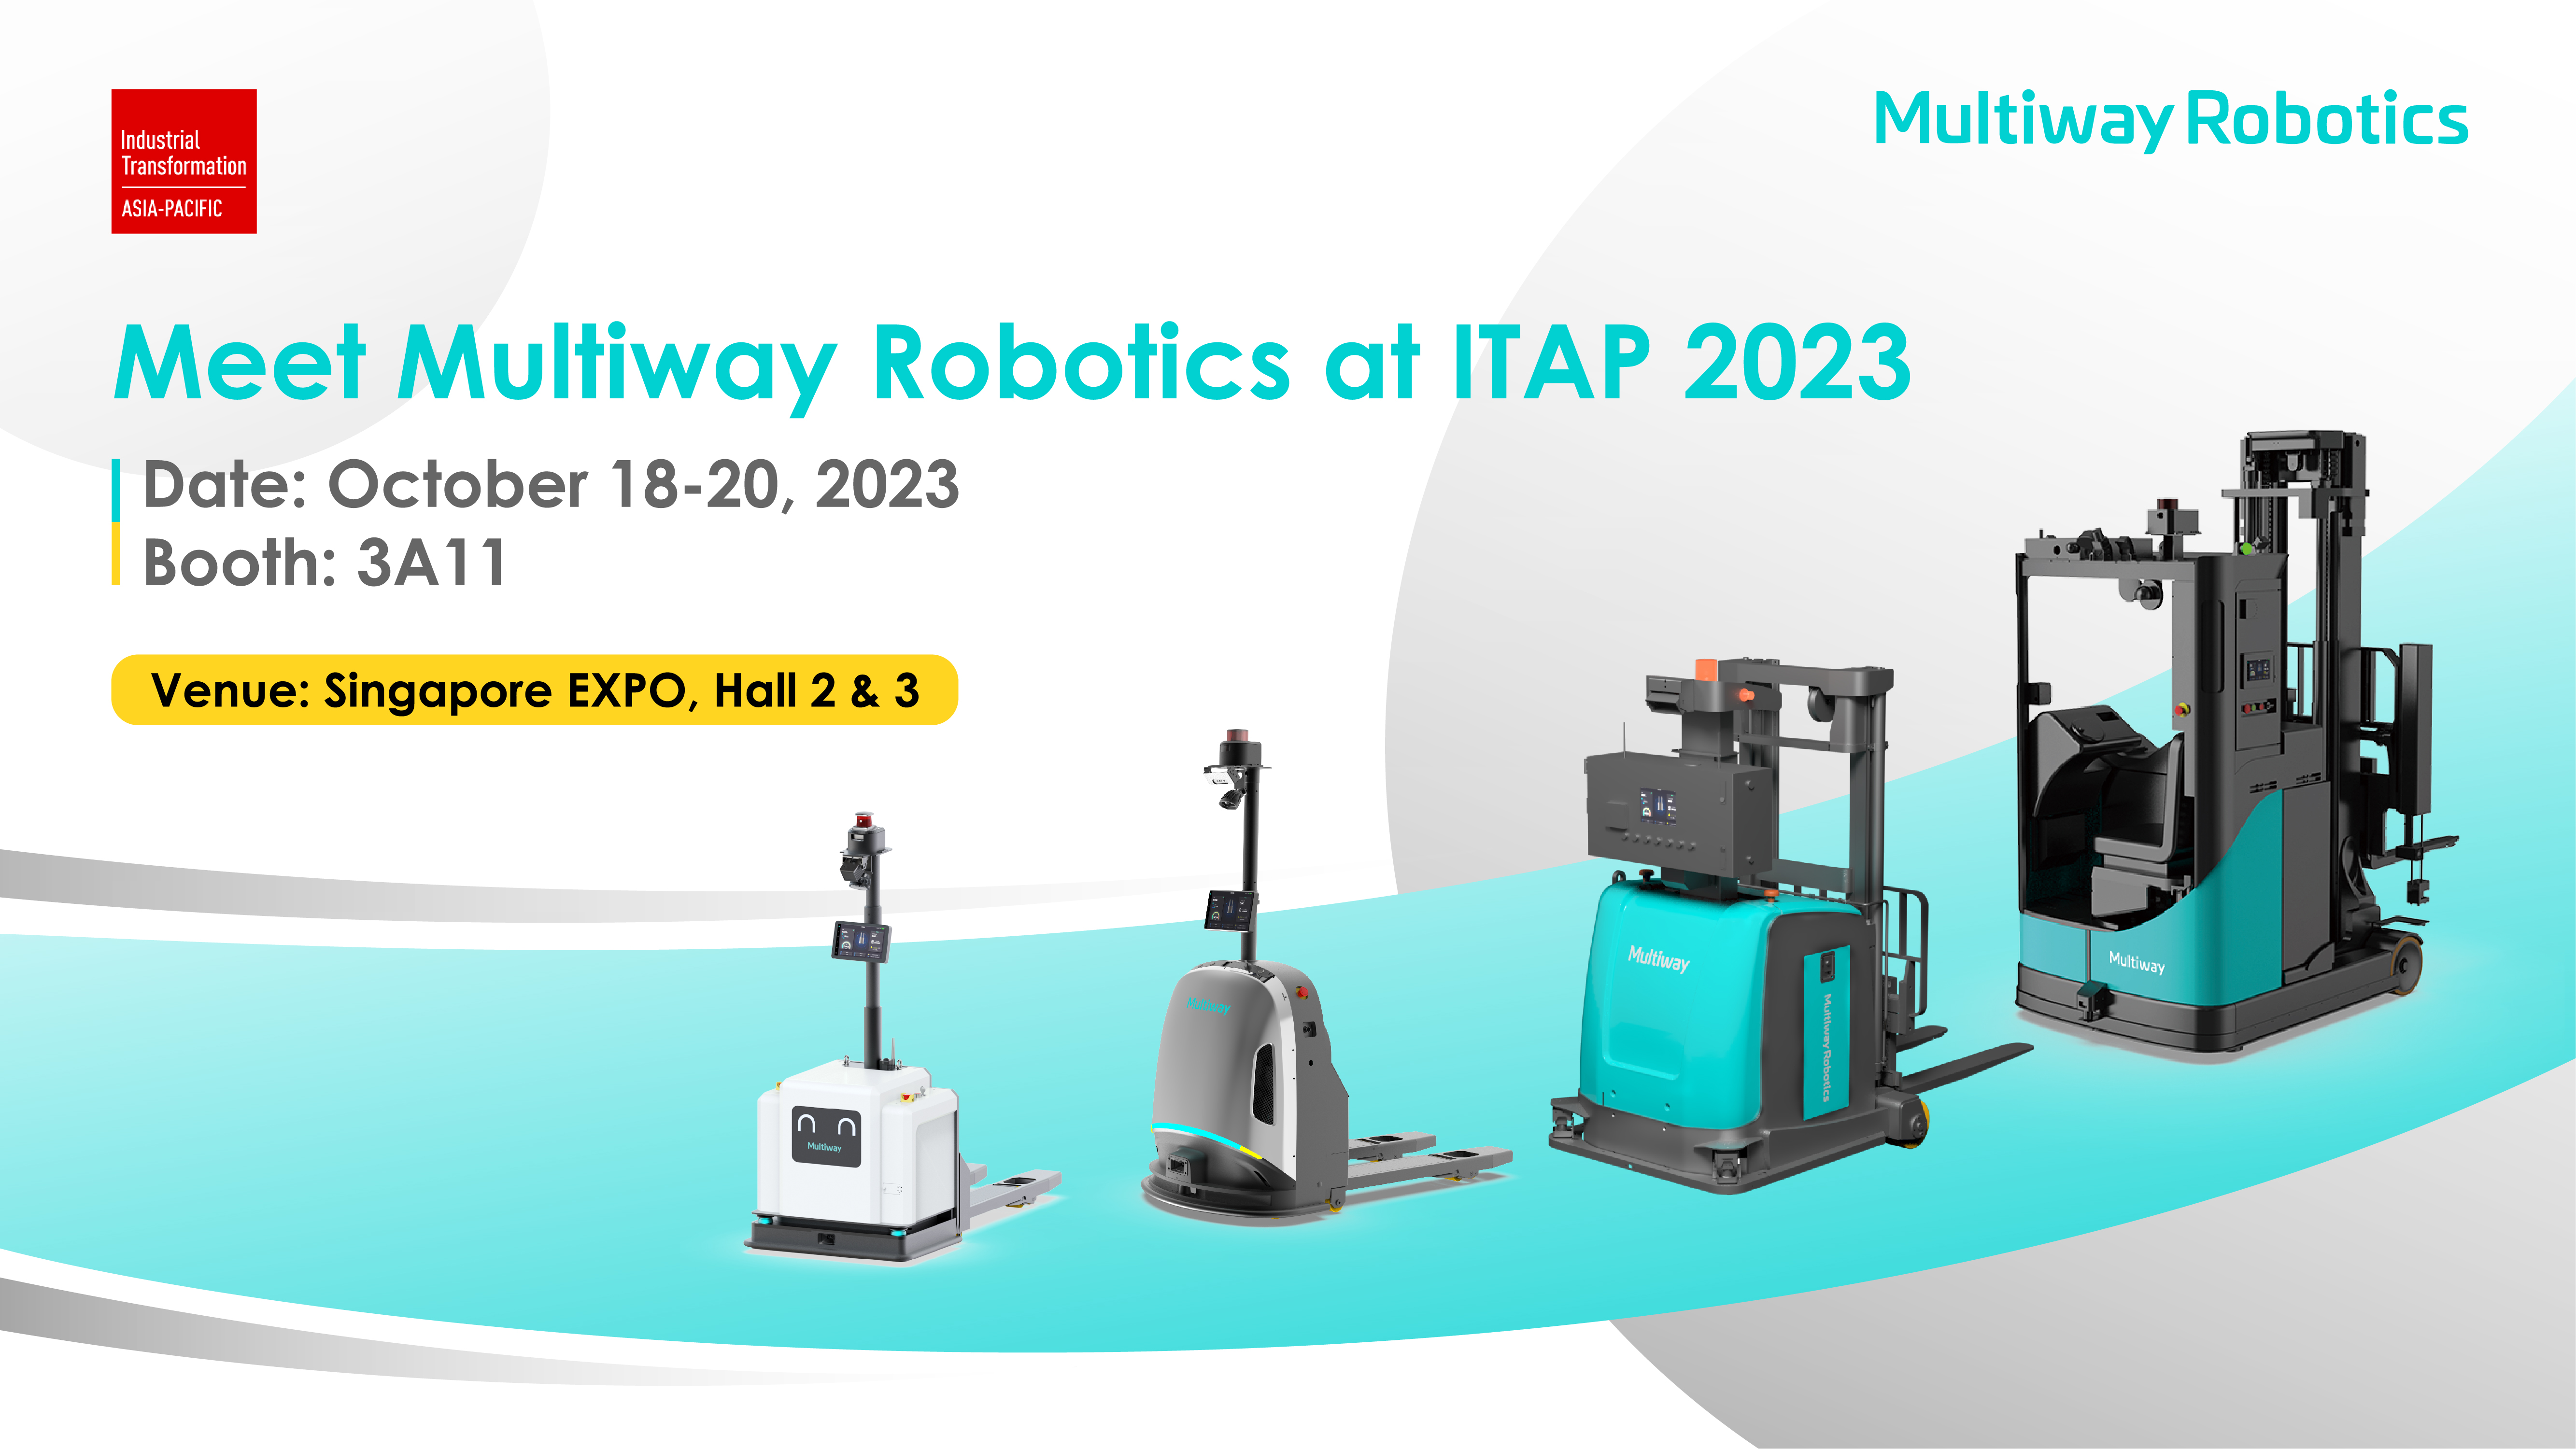 Join Multiway Robotics at Industrial Transformation ASIA-PACIFIC 2023!